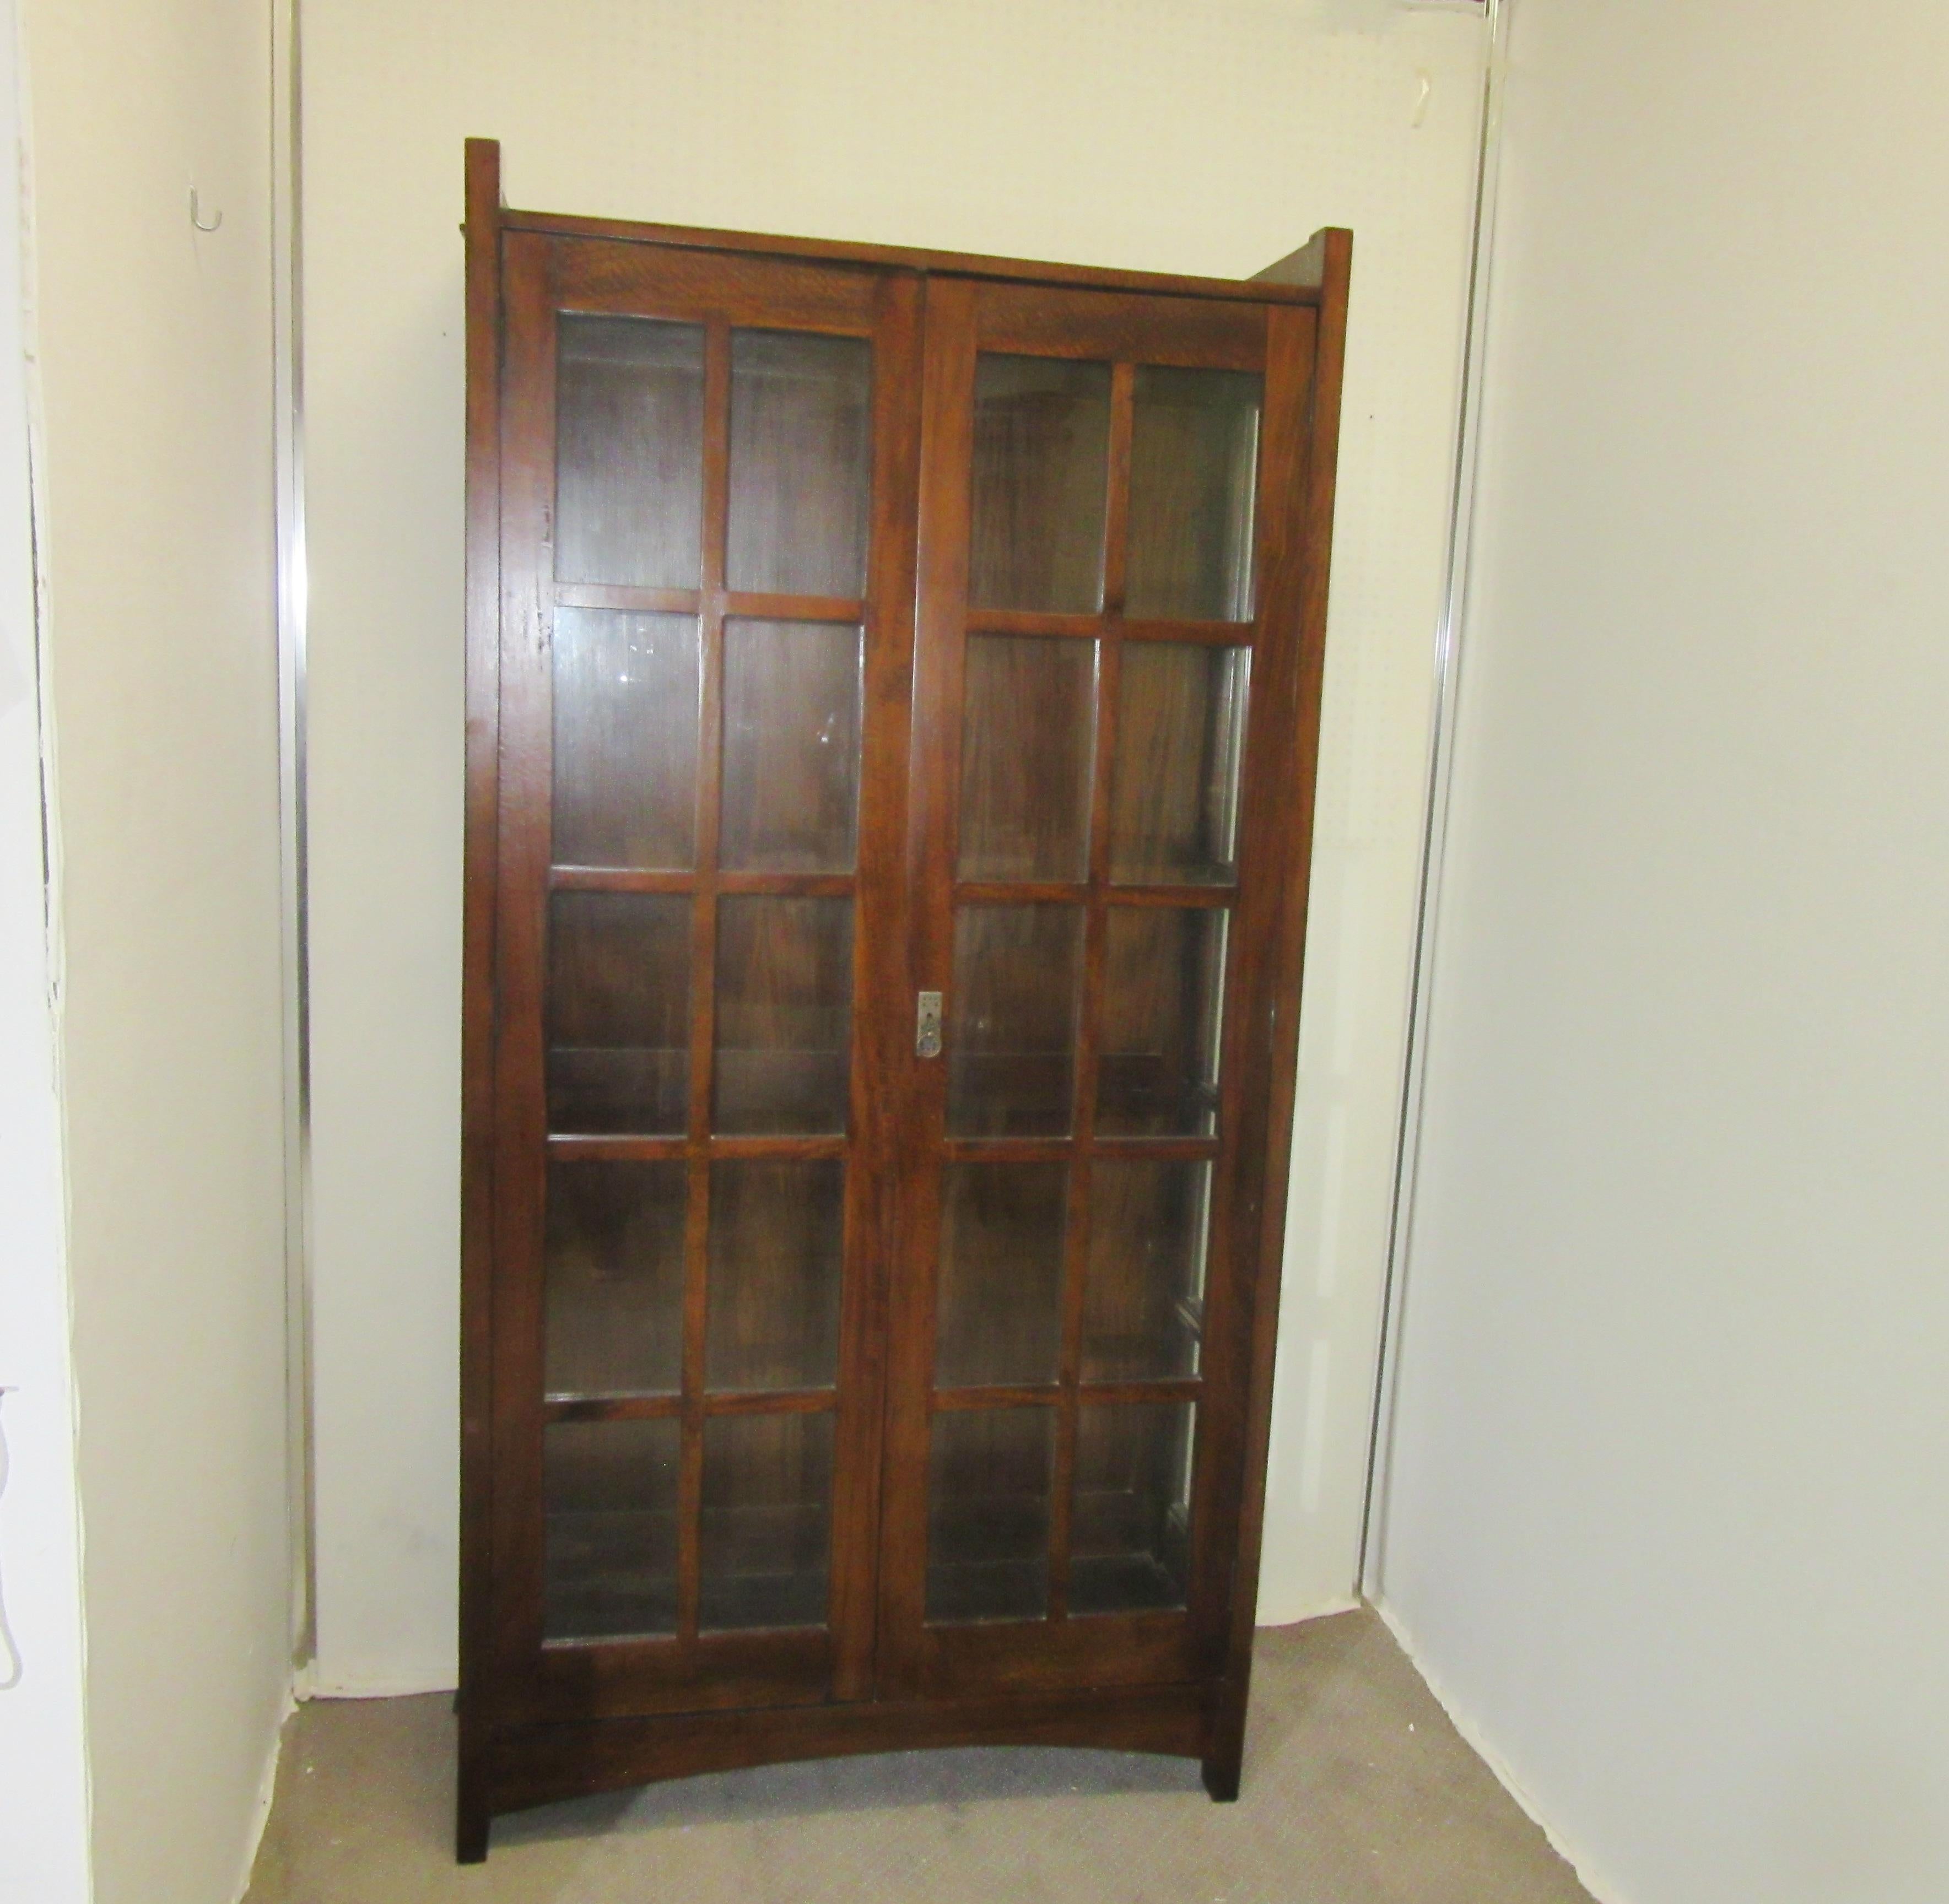 English Arts & Crafts mahogany bookcase. The piece has forty individual panes of glass; twenty in the front and ten on each side. There are a total of five wood shelves on the interior for storage. Made in the 1910s in England, the piece is in great